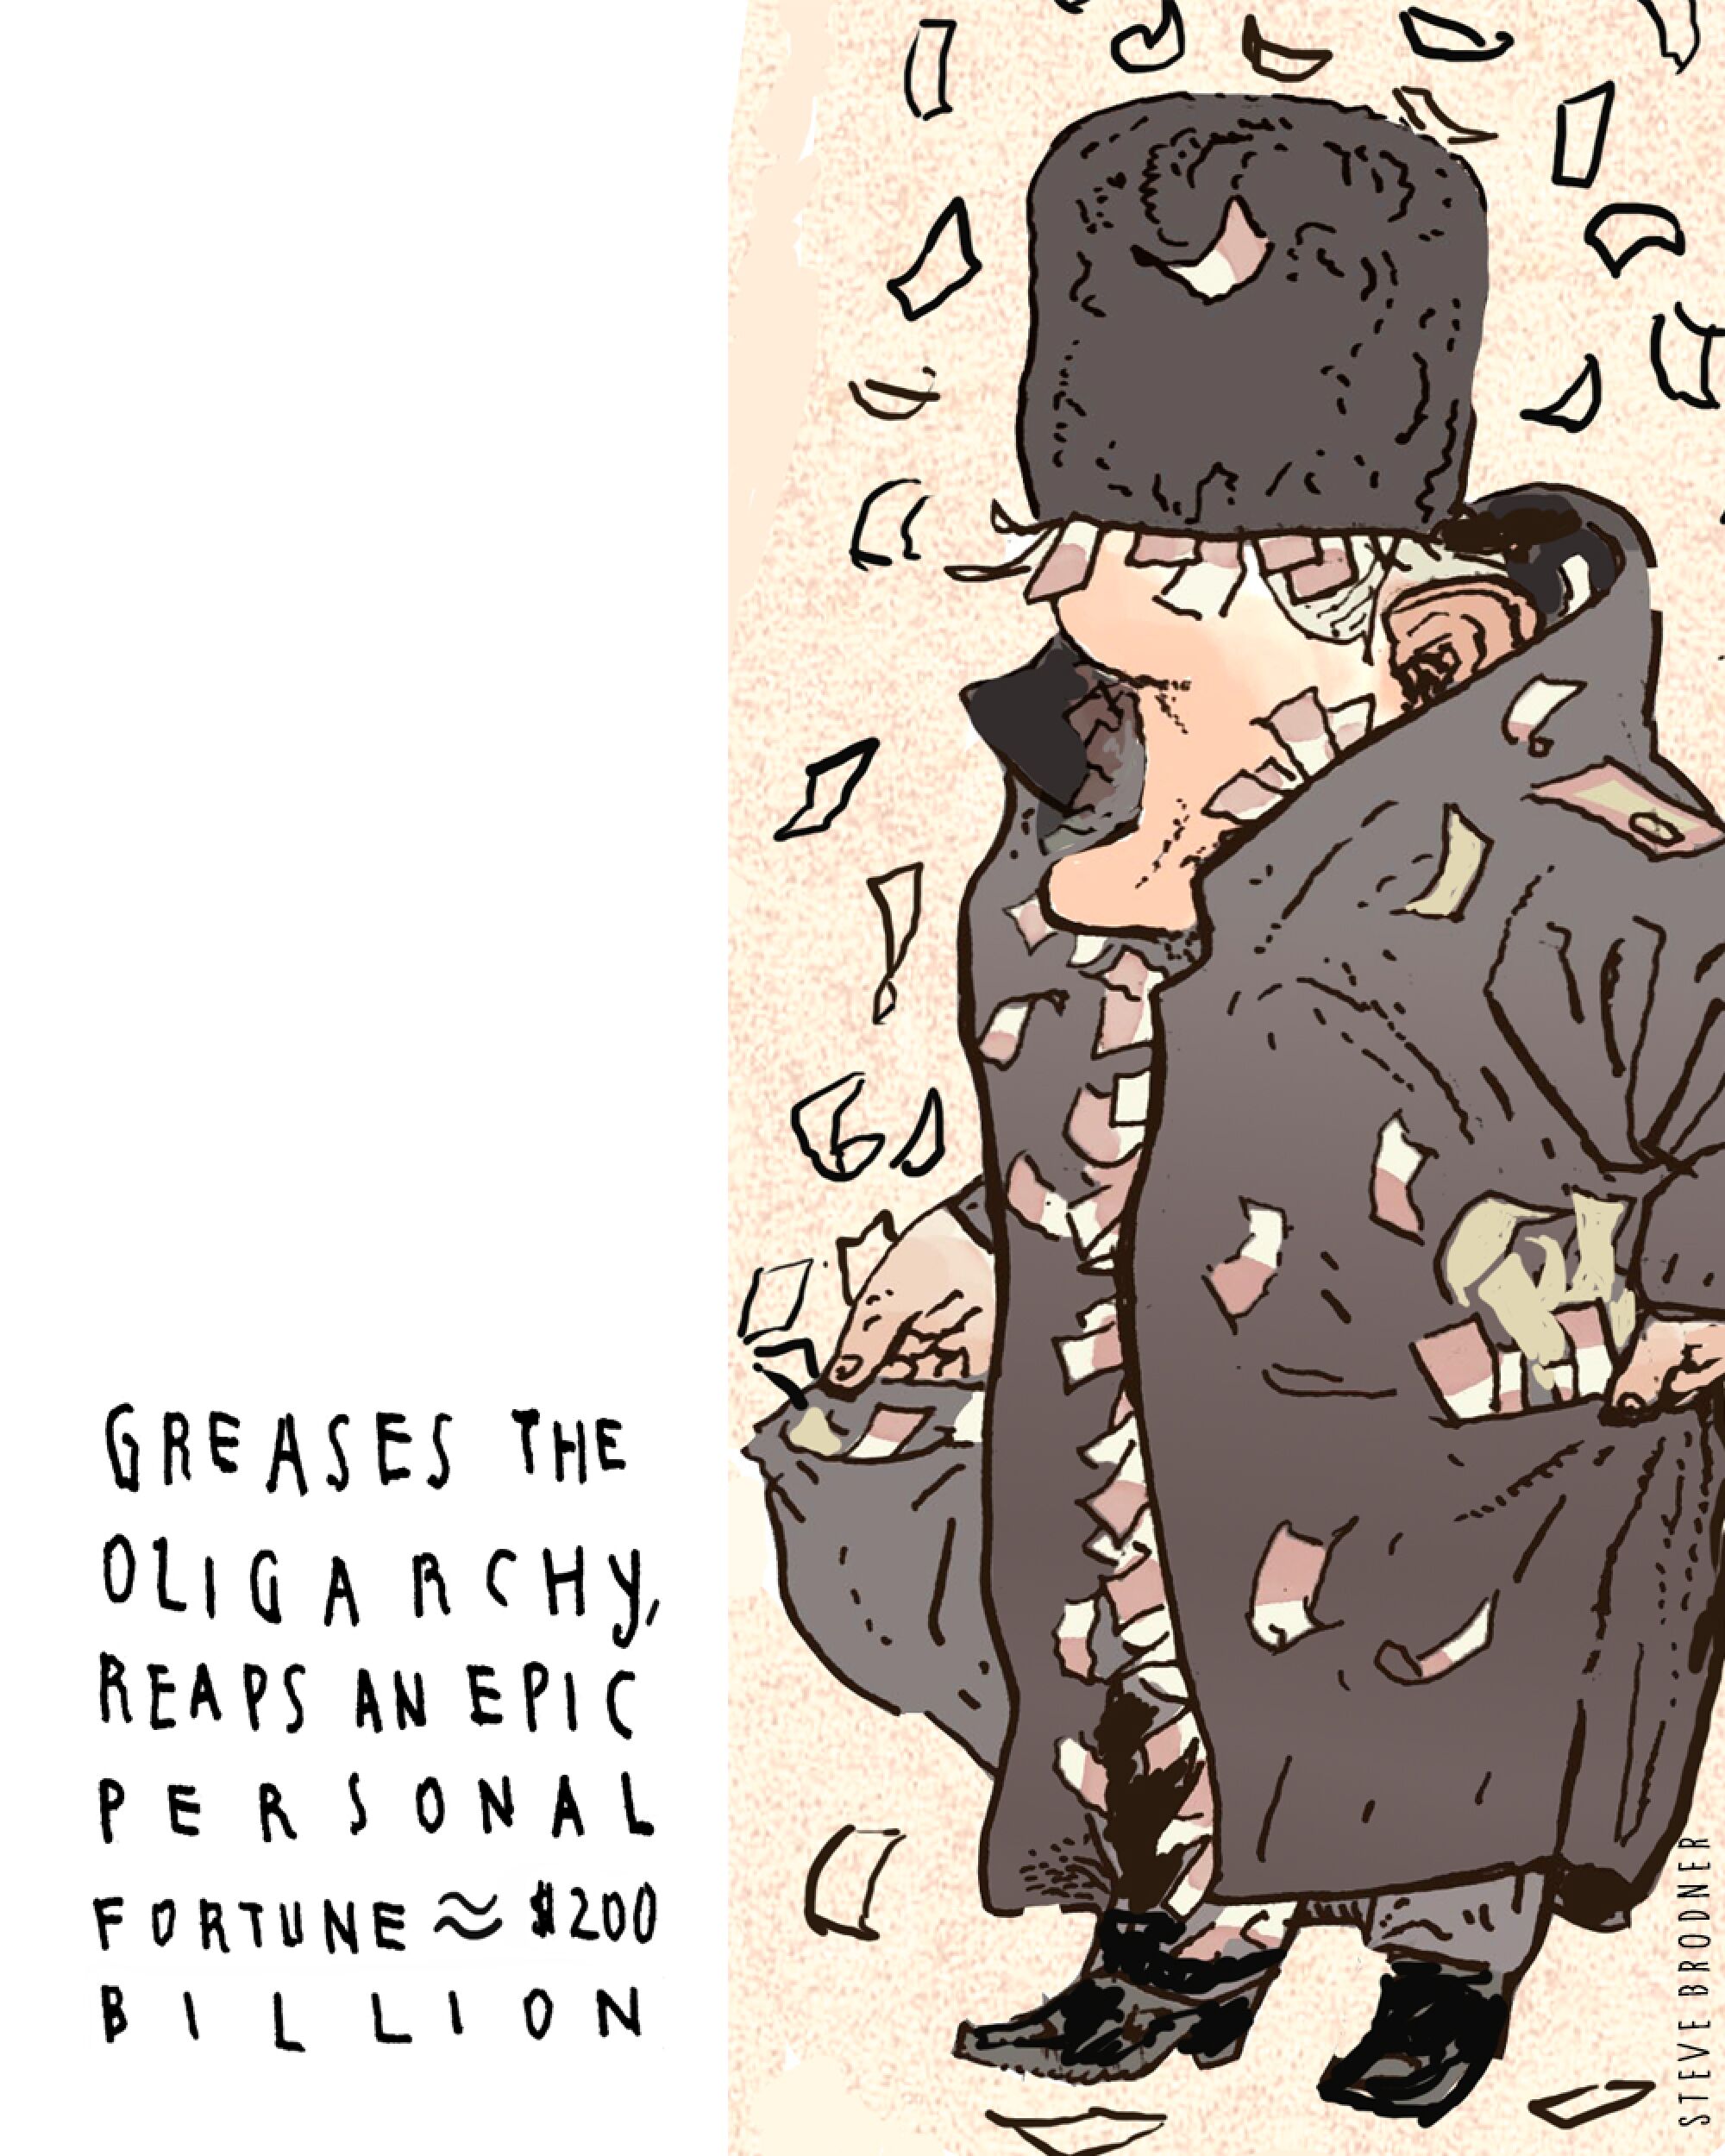 Cartoon of Putin with money stuffed in his coat. Text: "Greases the oligarchy, reaps an epic personal fortune $200 billion"